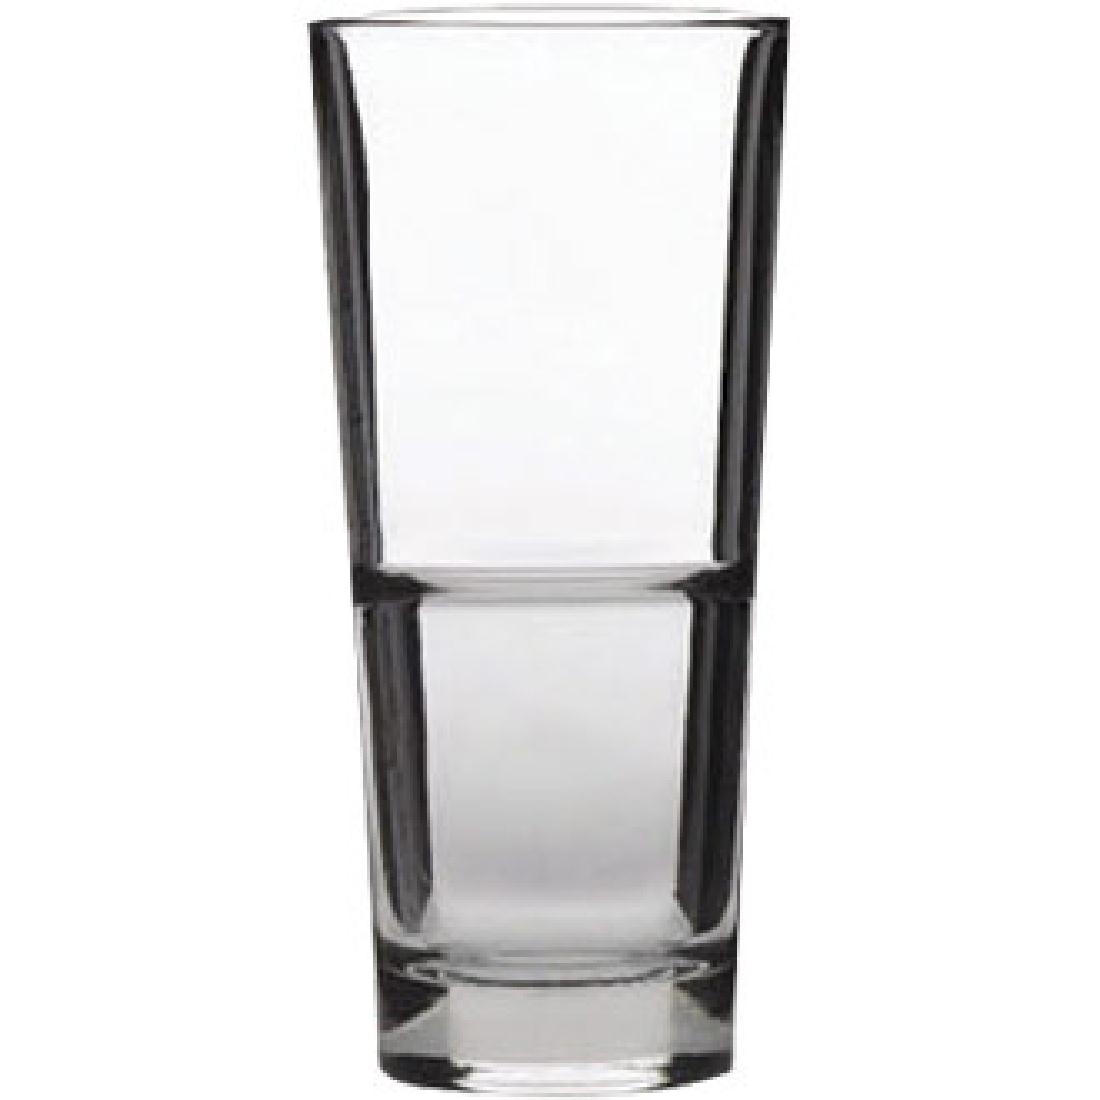 Libbey Endeavour Highball Glasses 350ml CE Marked at 285ml